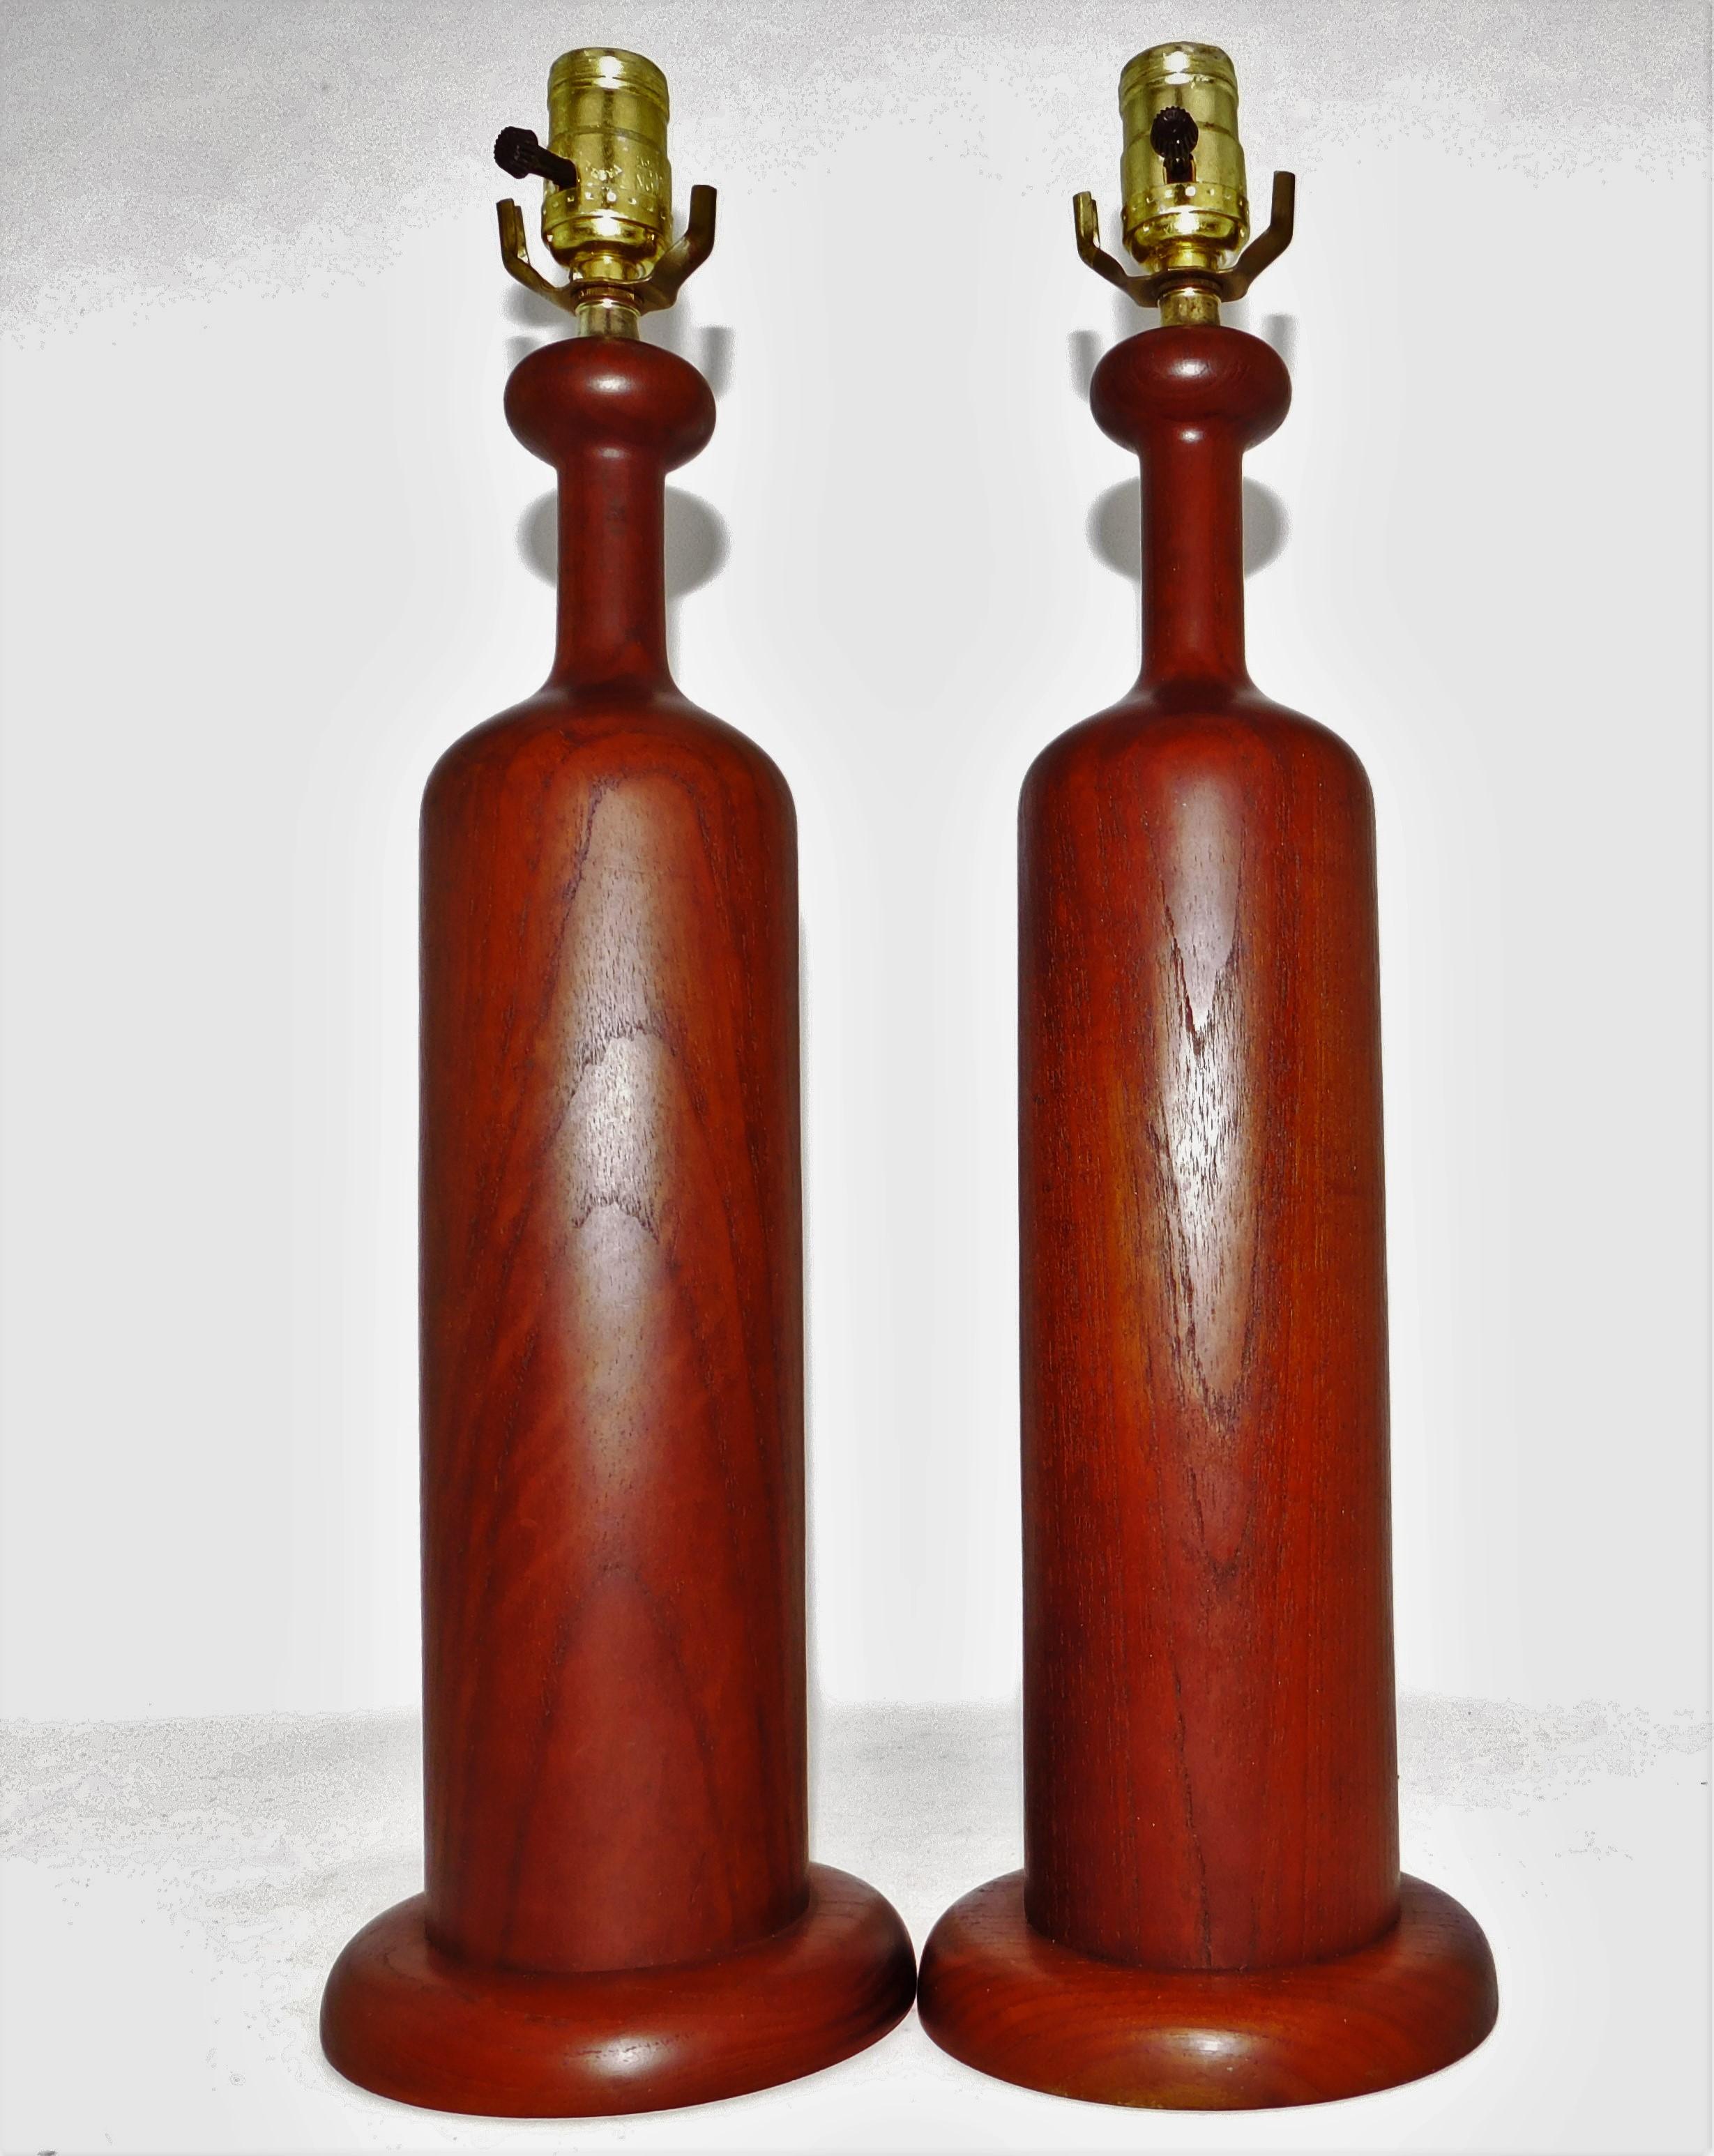 Fantastic set of sculptural Danish teak table lamps in solid staved-teak wood (ca. 1960s, Denmark). Vivid grain and rich color with in excellent, vintage condition with only minor wear present.
No shades included - listing is for the pair.
Height